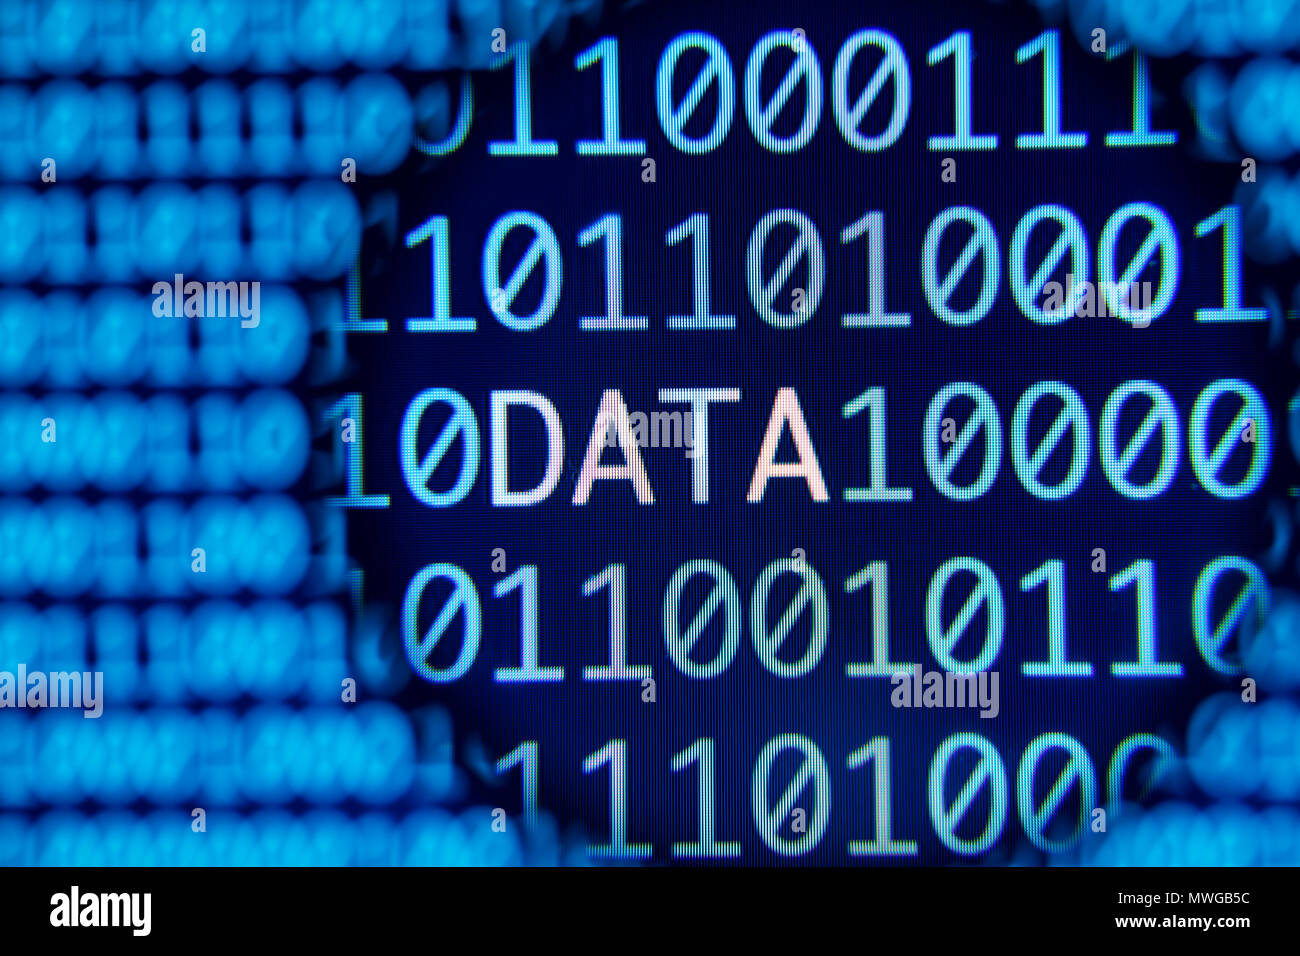 Online data security concept. Stock Photo